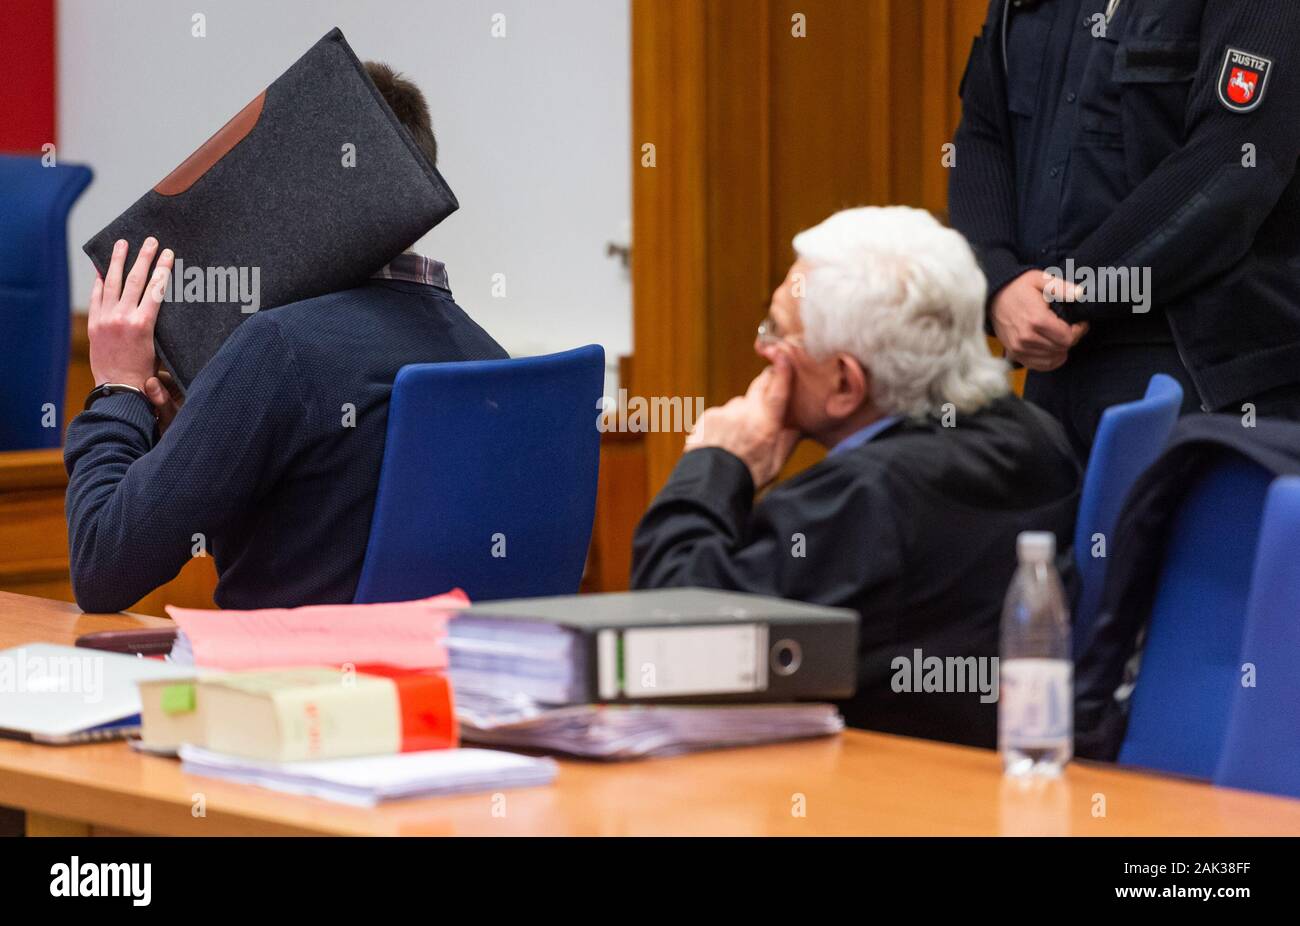 07 January 2020, Lower Saxony, Lüneburg: The defendant (l) sits next to Herbert Lederer (M), his lawyer, in the Lüneburg Regional Court before the start of the trial. The 26-year-old is alleged to have sexually abused several children in Lueneburg and other places as trainer and supervisor of a DLRG local group. Photo: Philipp Schulze/dpa Stock Photo